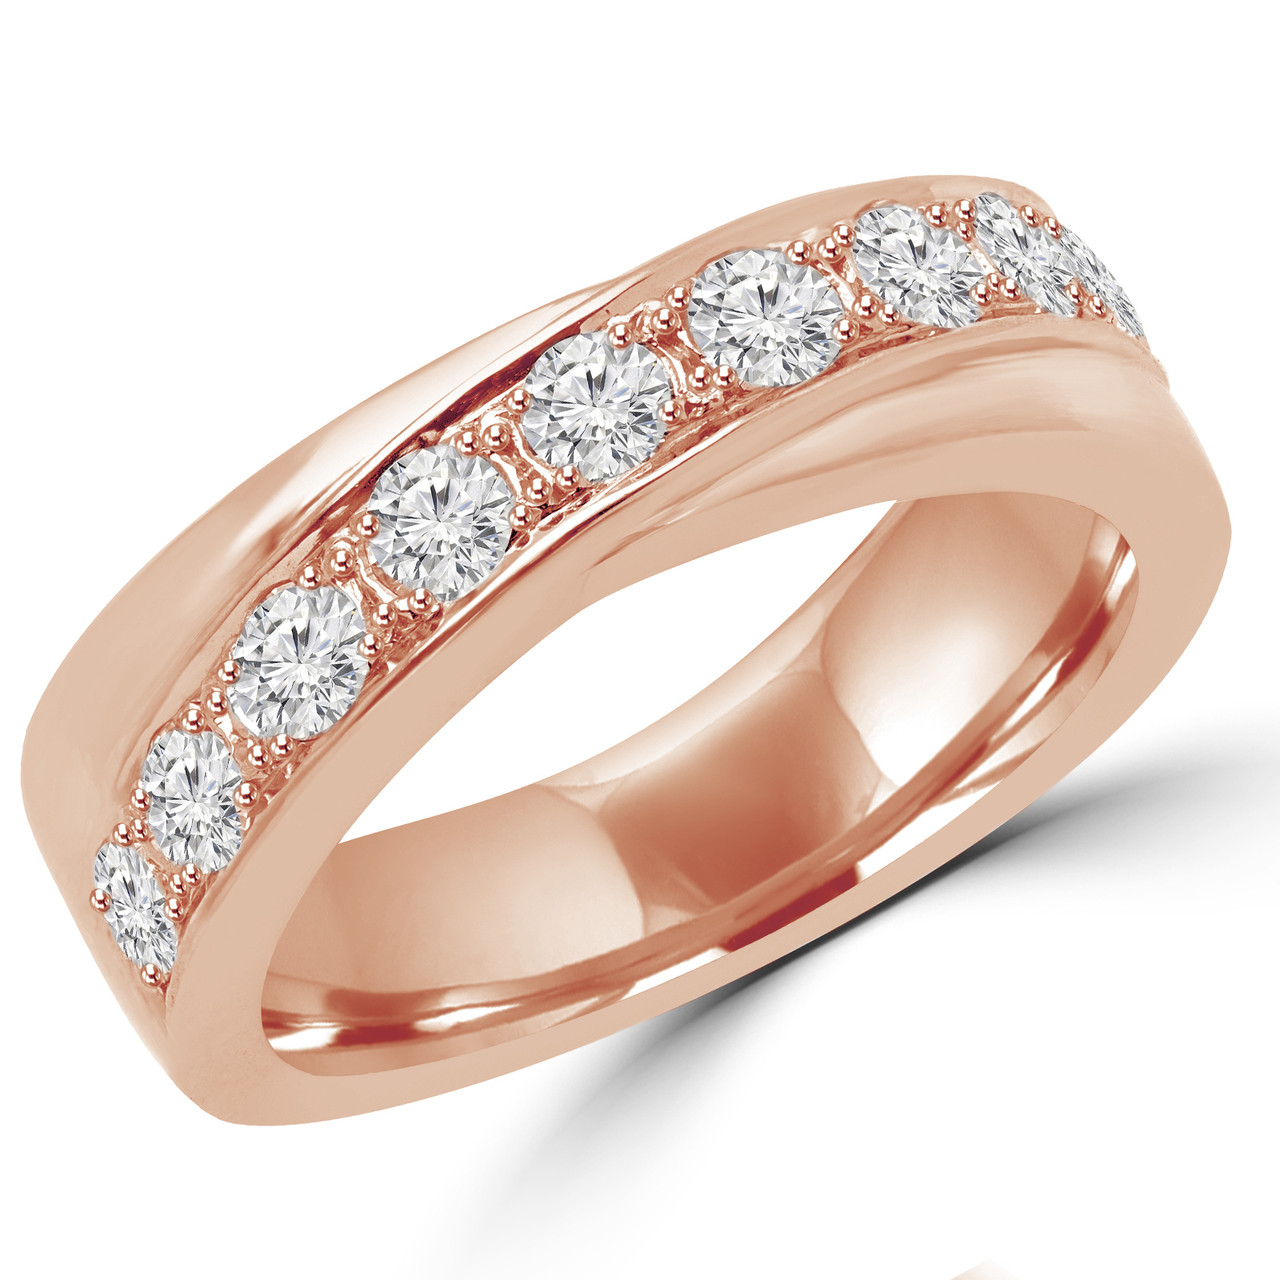 7 Tips About Multi-stone Rings From Jewellery Experts – Lucce